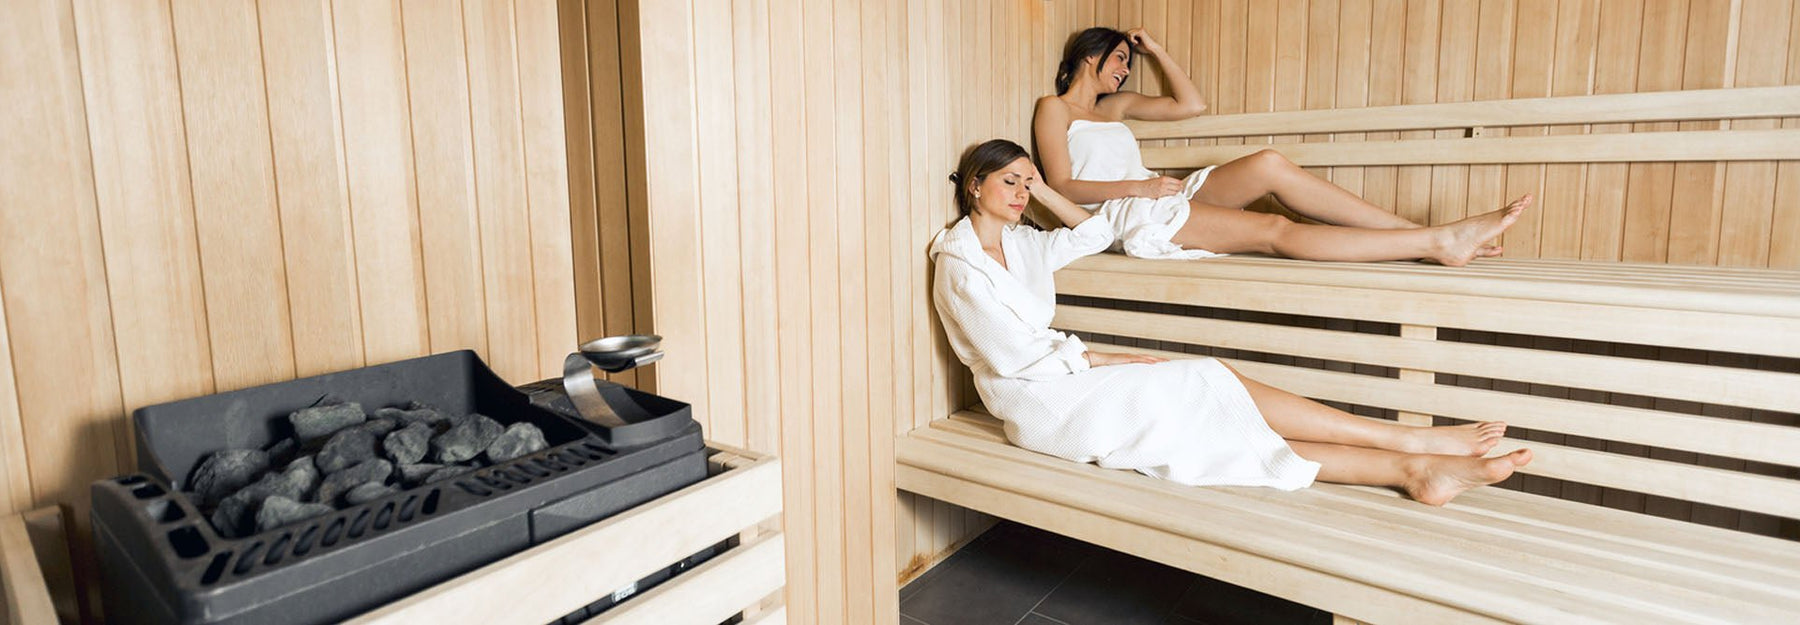 5 Quick And Easy Steps To Clean Your Sauna - Great Backyard Place